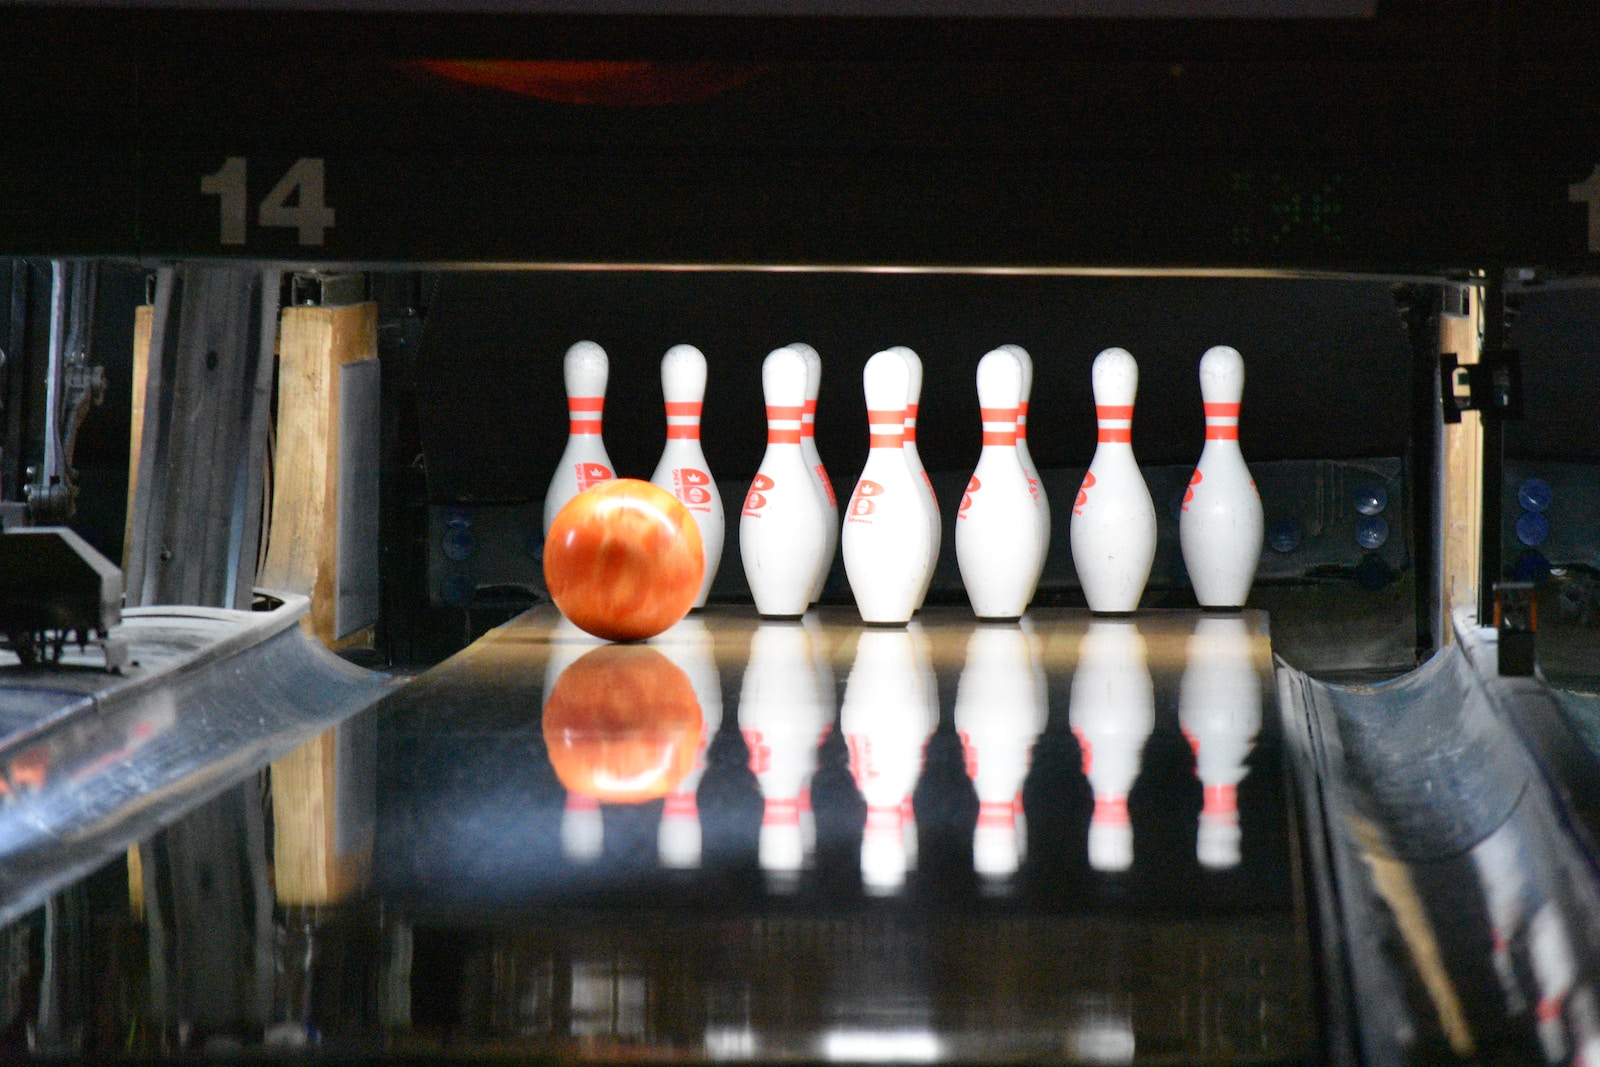 bowling ball going to hit bowling pins